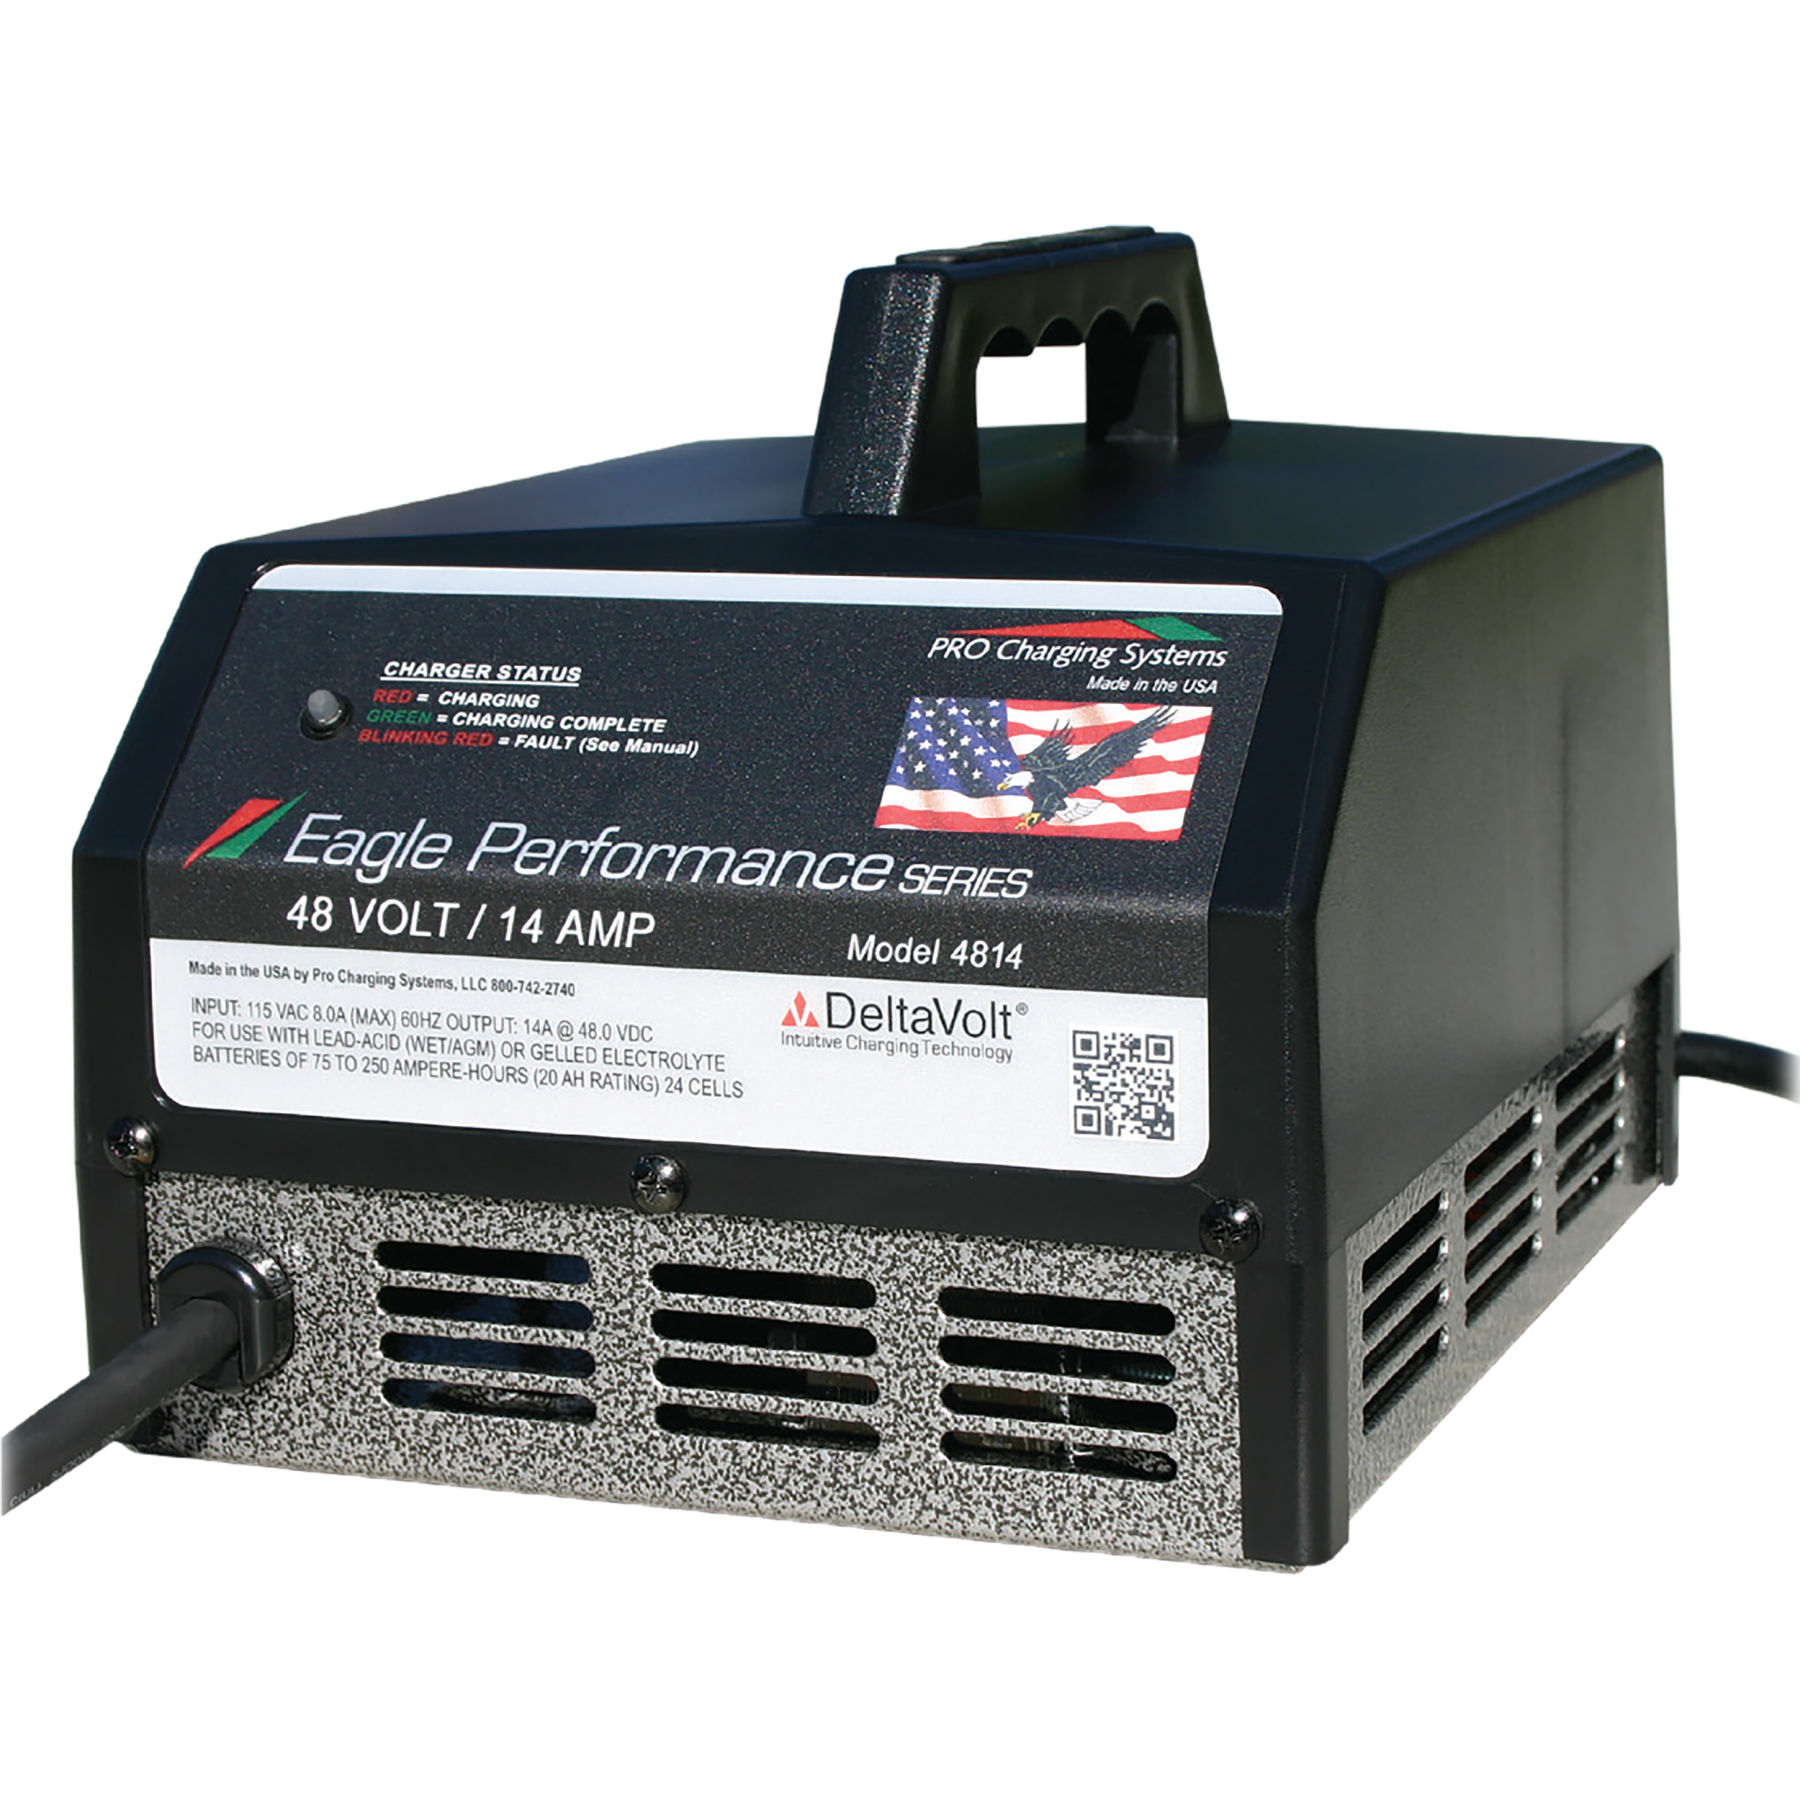 Eagle Performance Series 48v 14 Amp Golf Cart Charger with SB50 Grey